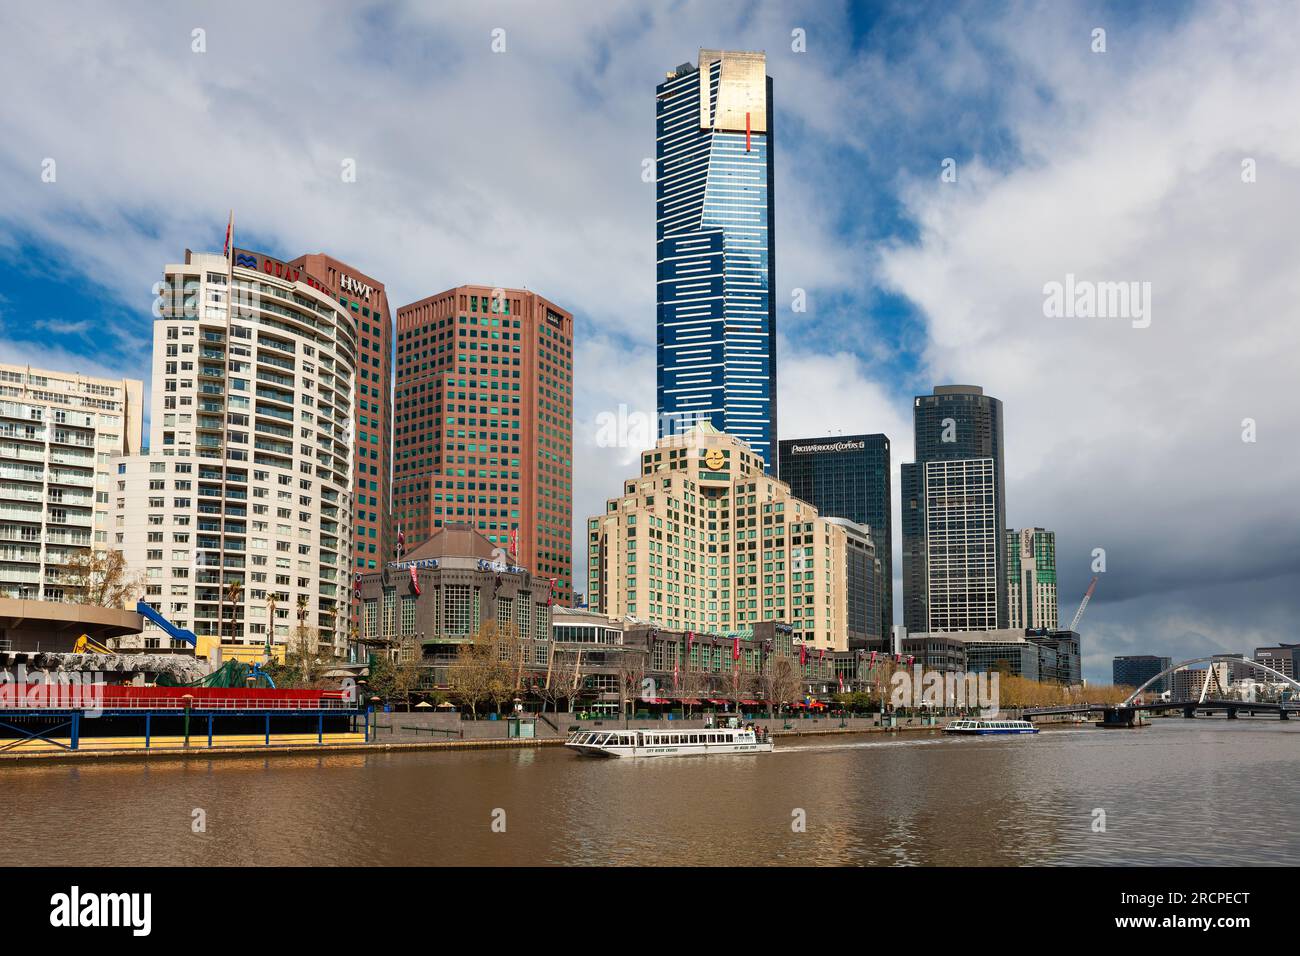 Melbourne, Australia - September 28, 2010 : Melbourne city southbank. Buildings, cafes and shopping malls on south side of Yarra River. Stock Photo